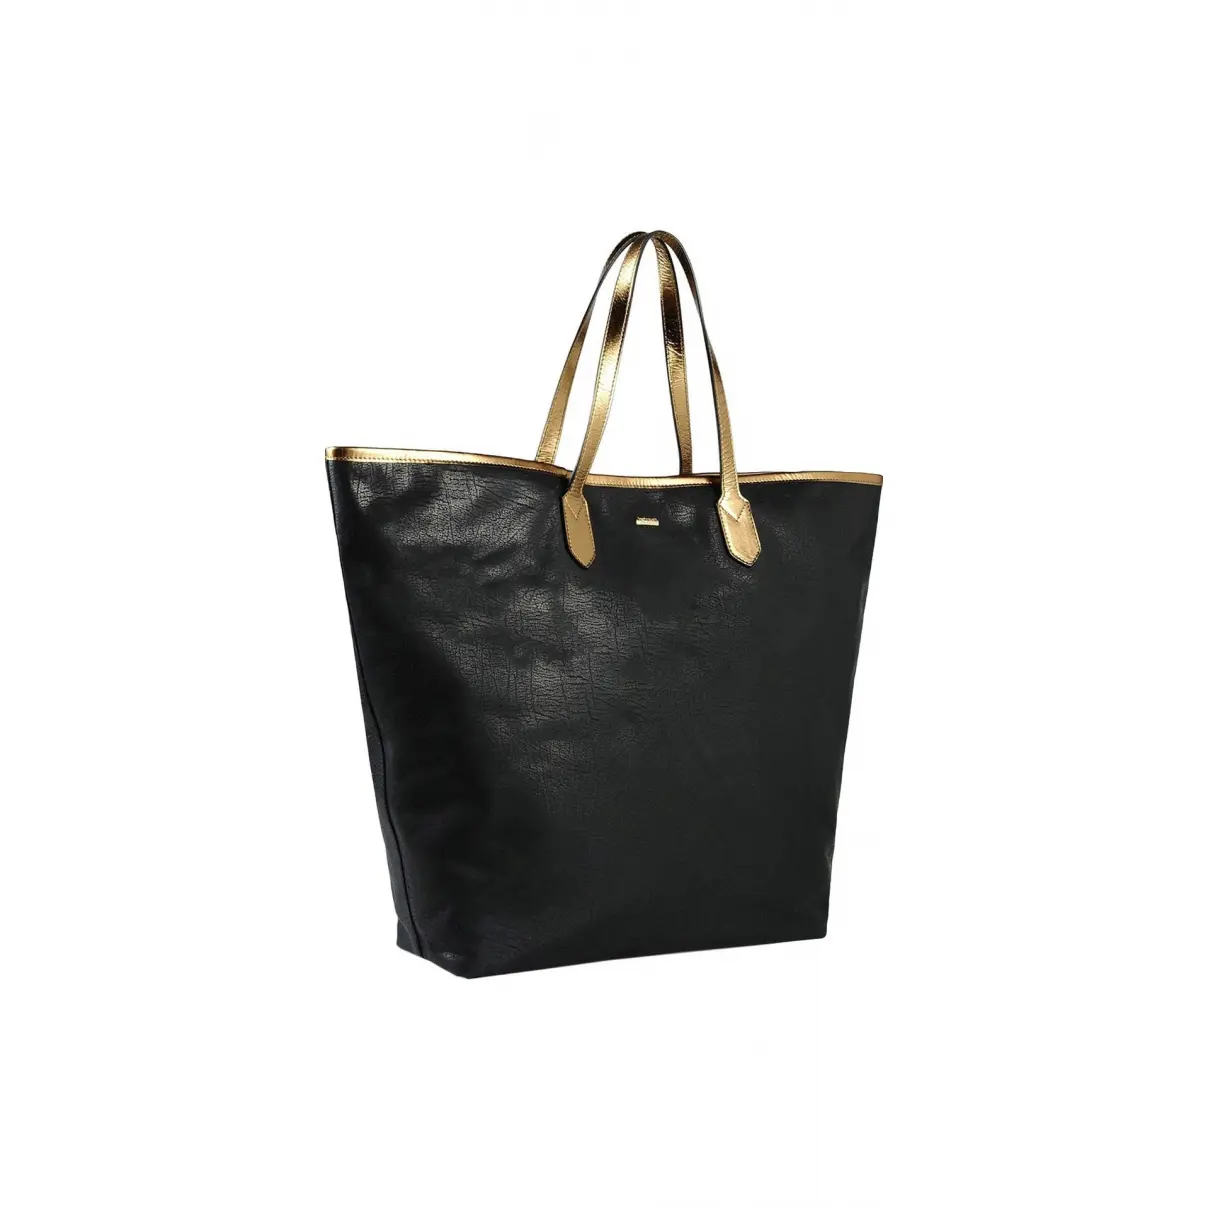 Buy Just Cavalli Leather tote online